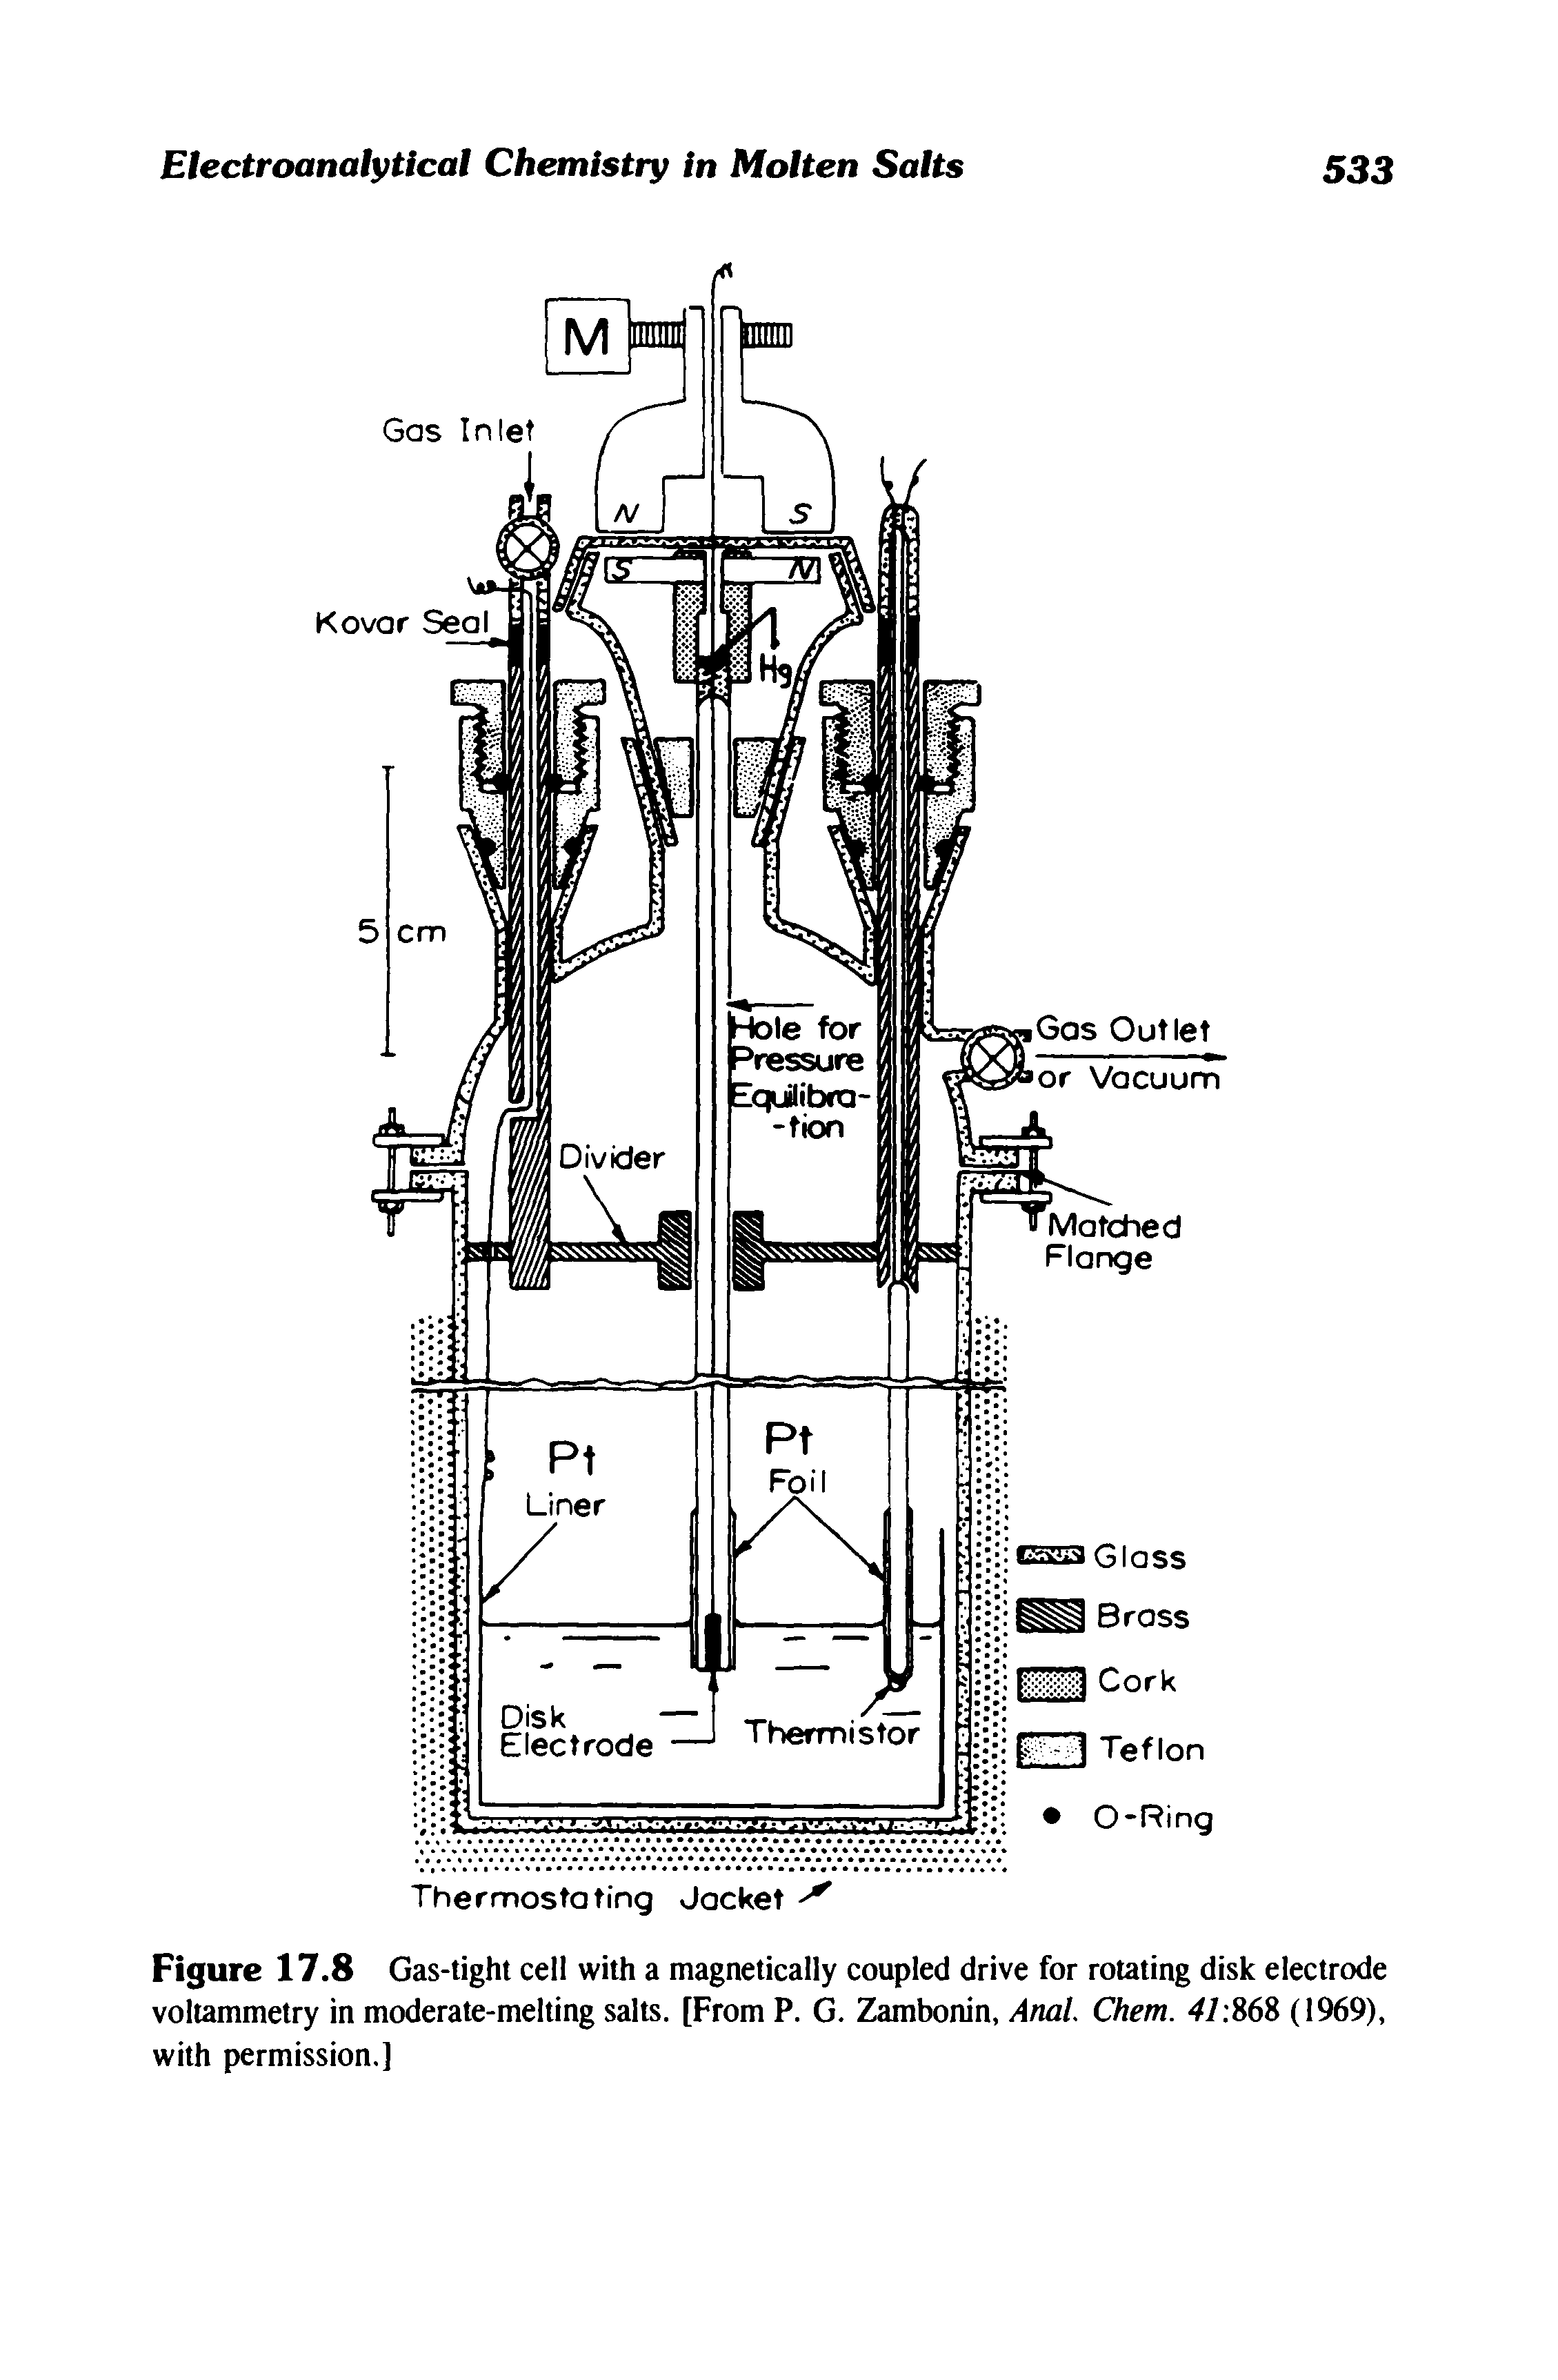 Figure 17.8 Gas-tight cell with a magnetically coupled drive for rotating disk electrode voltammetry in moderate-melting salts. [From P. G. Zambonin, Anal. Chem. 41 868 (1969), with permission.]...